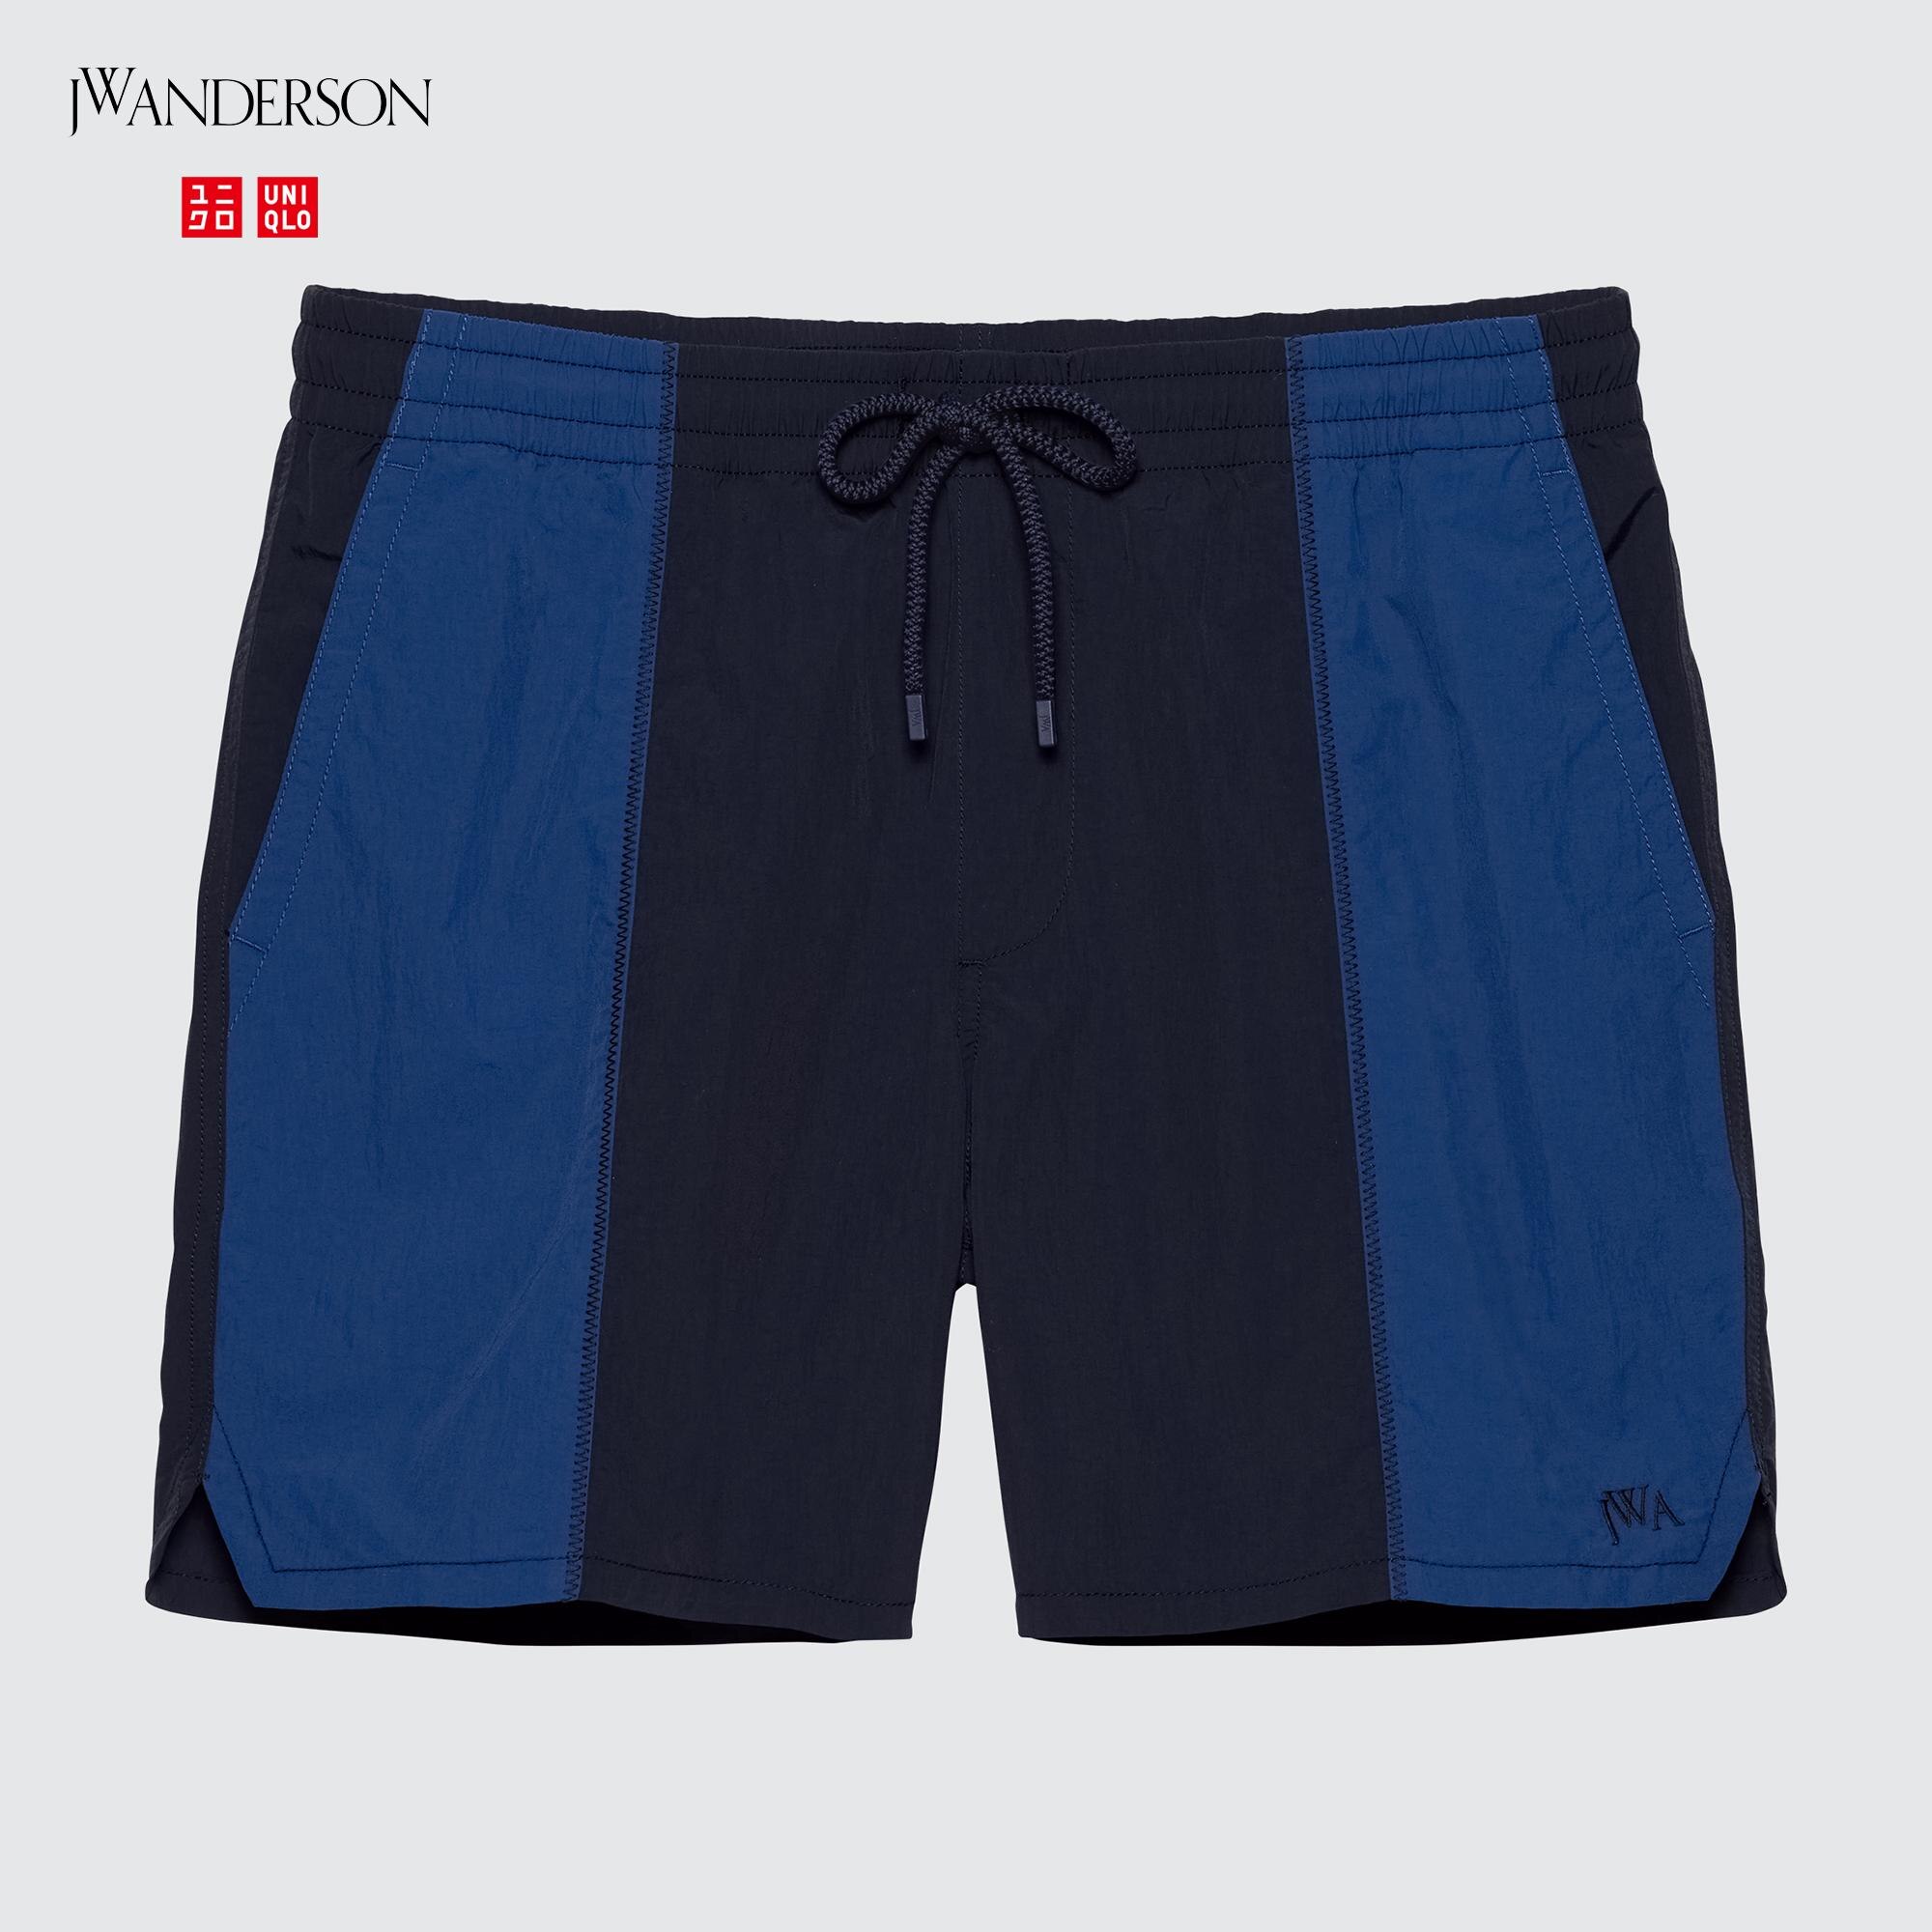 JW ANDERSON ACTIVE UTILITY SHORTS